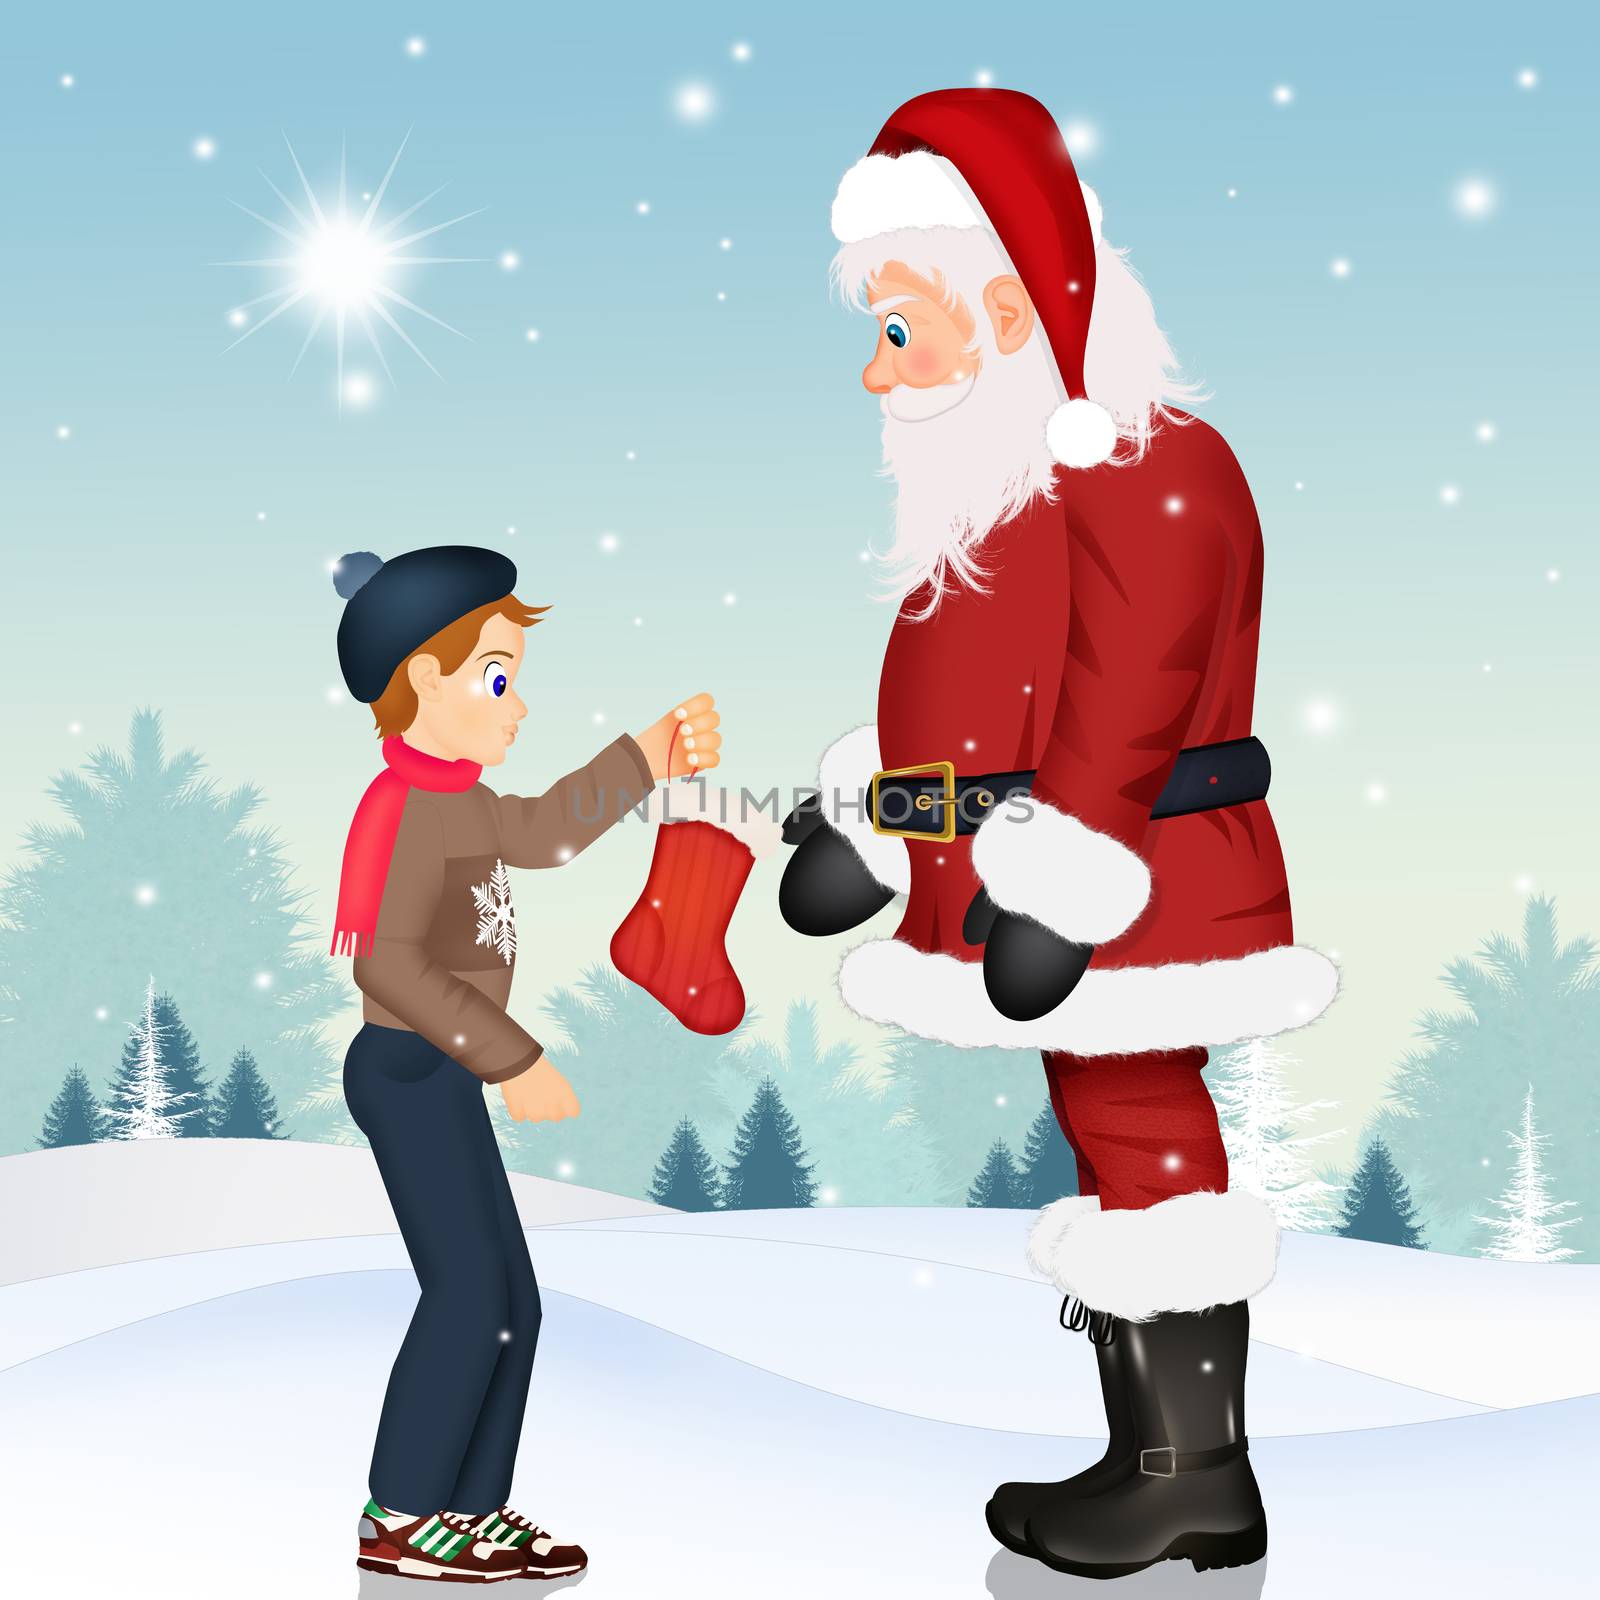 Santa Claus and children with Christmas socks